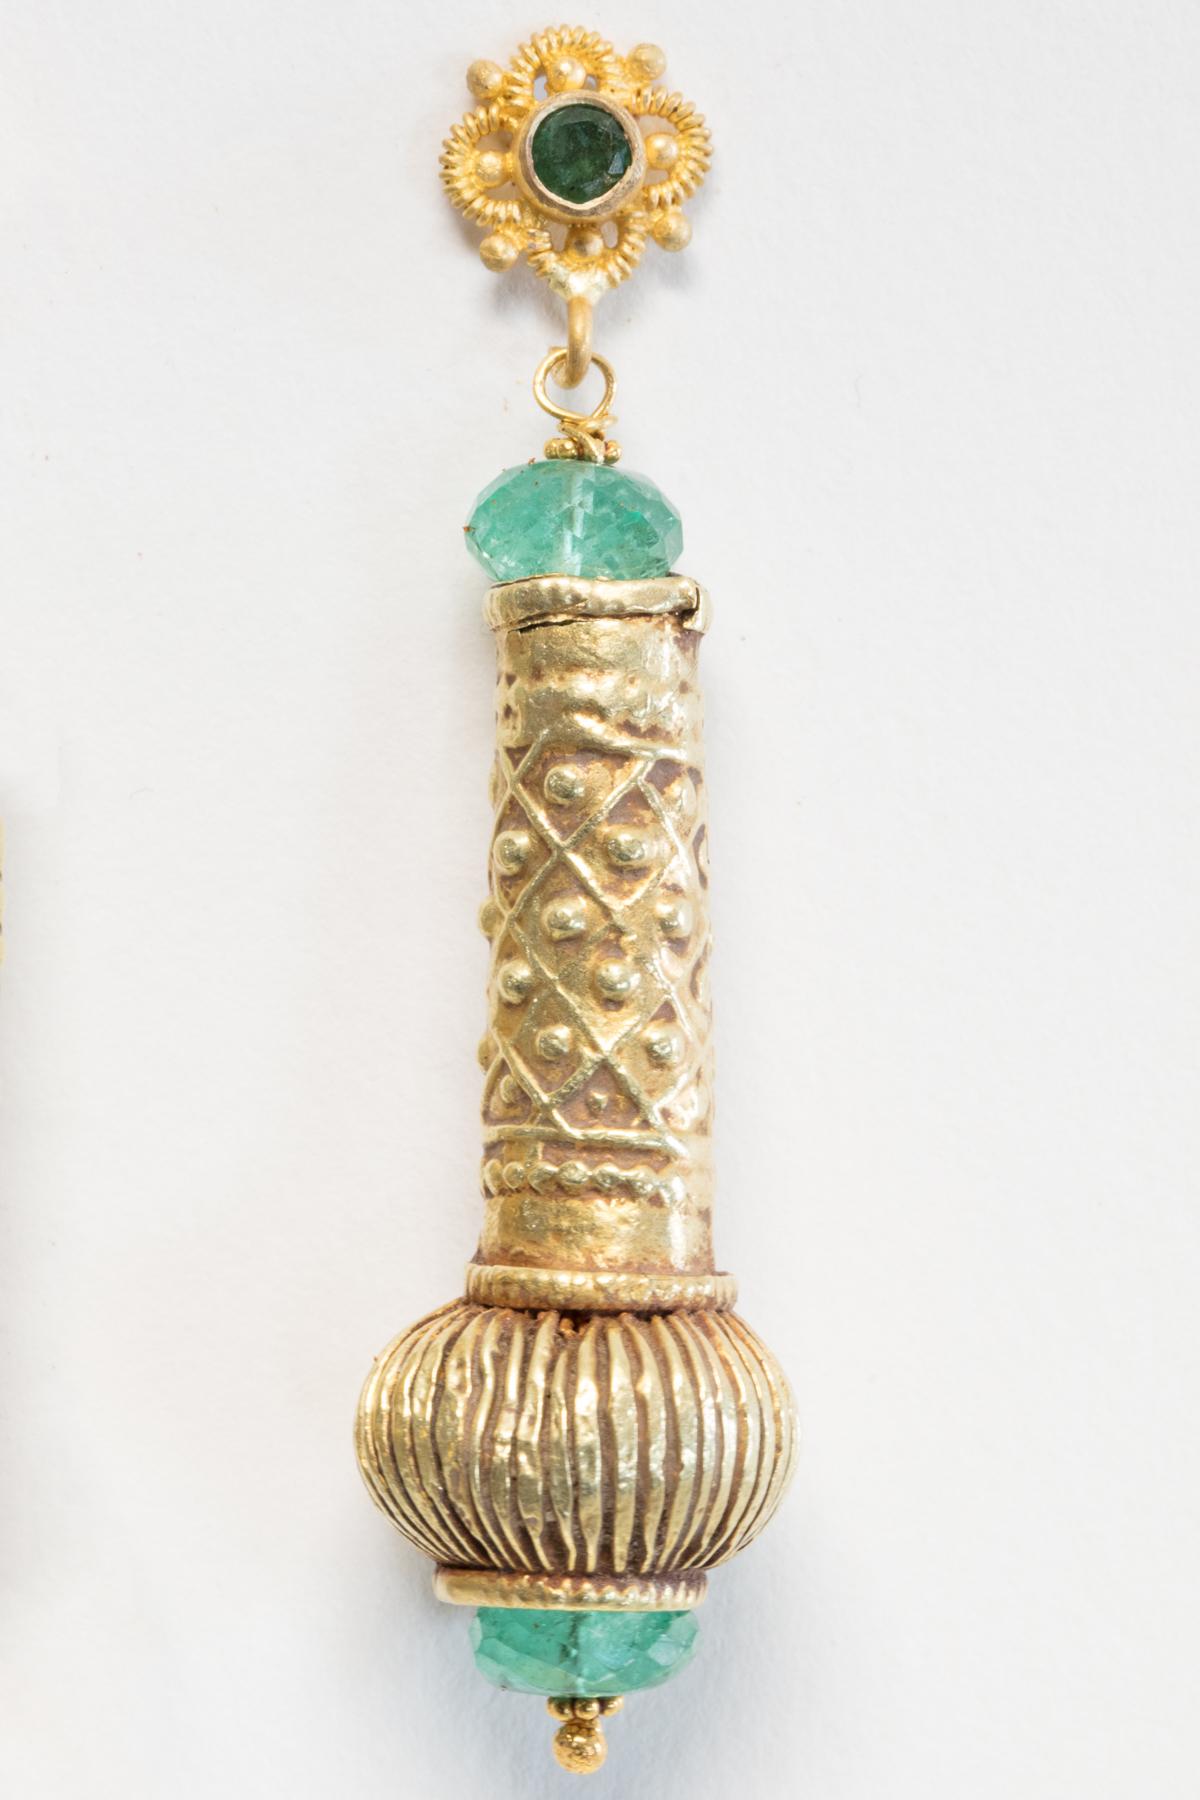 Faceted Colombian Emeralds adorn these fabulous 22K gold Indian tubular bead with hand-tooling and granulation work (originally from an old necklace).  22K gold post also with an emerald center.  Mid 1900's.  By Deborah Lockhart Phillips